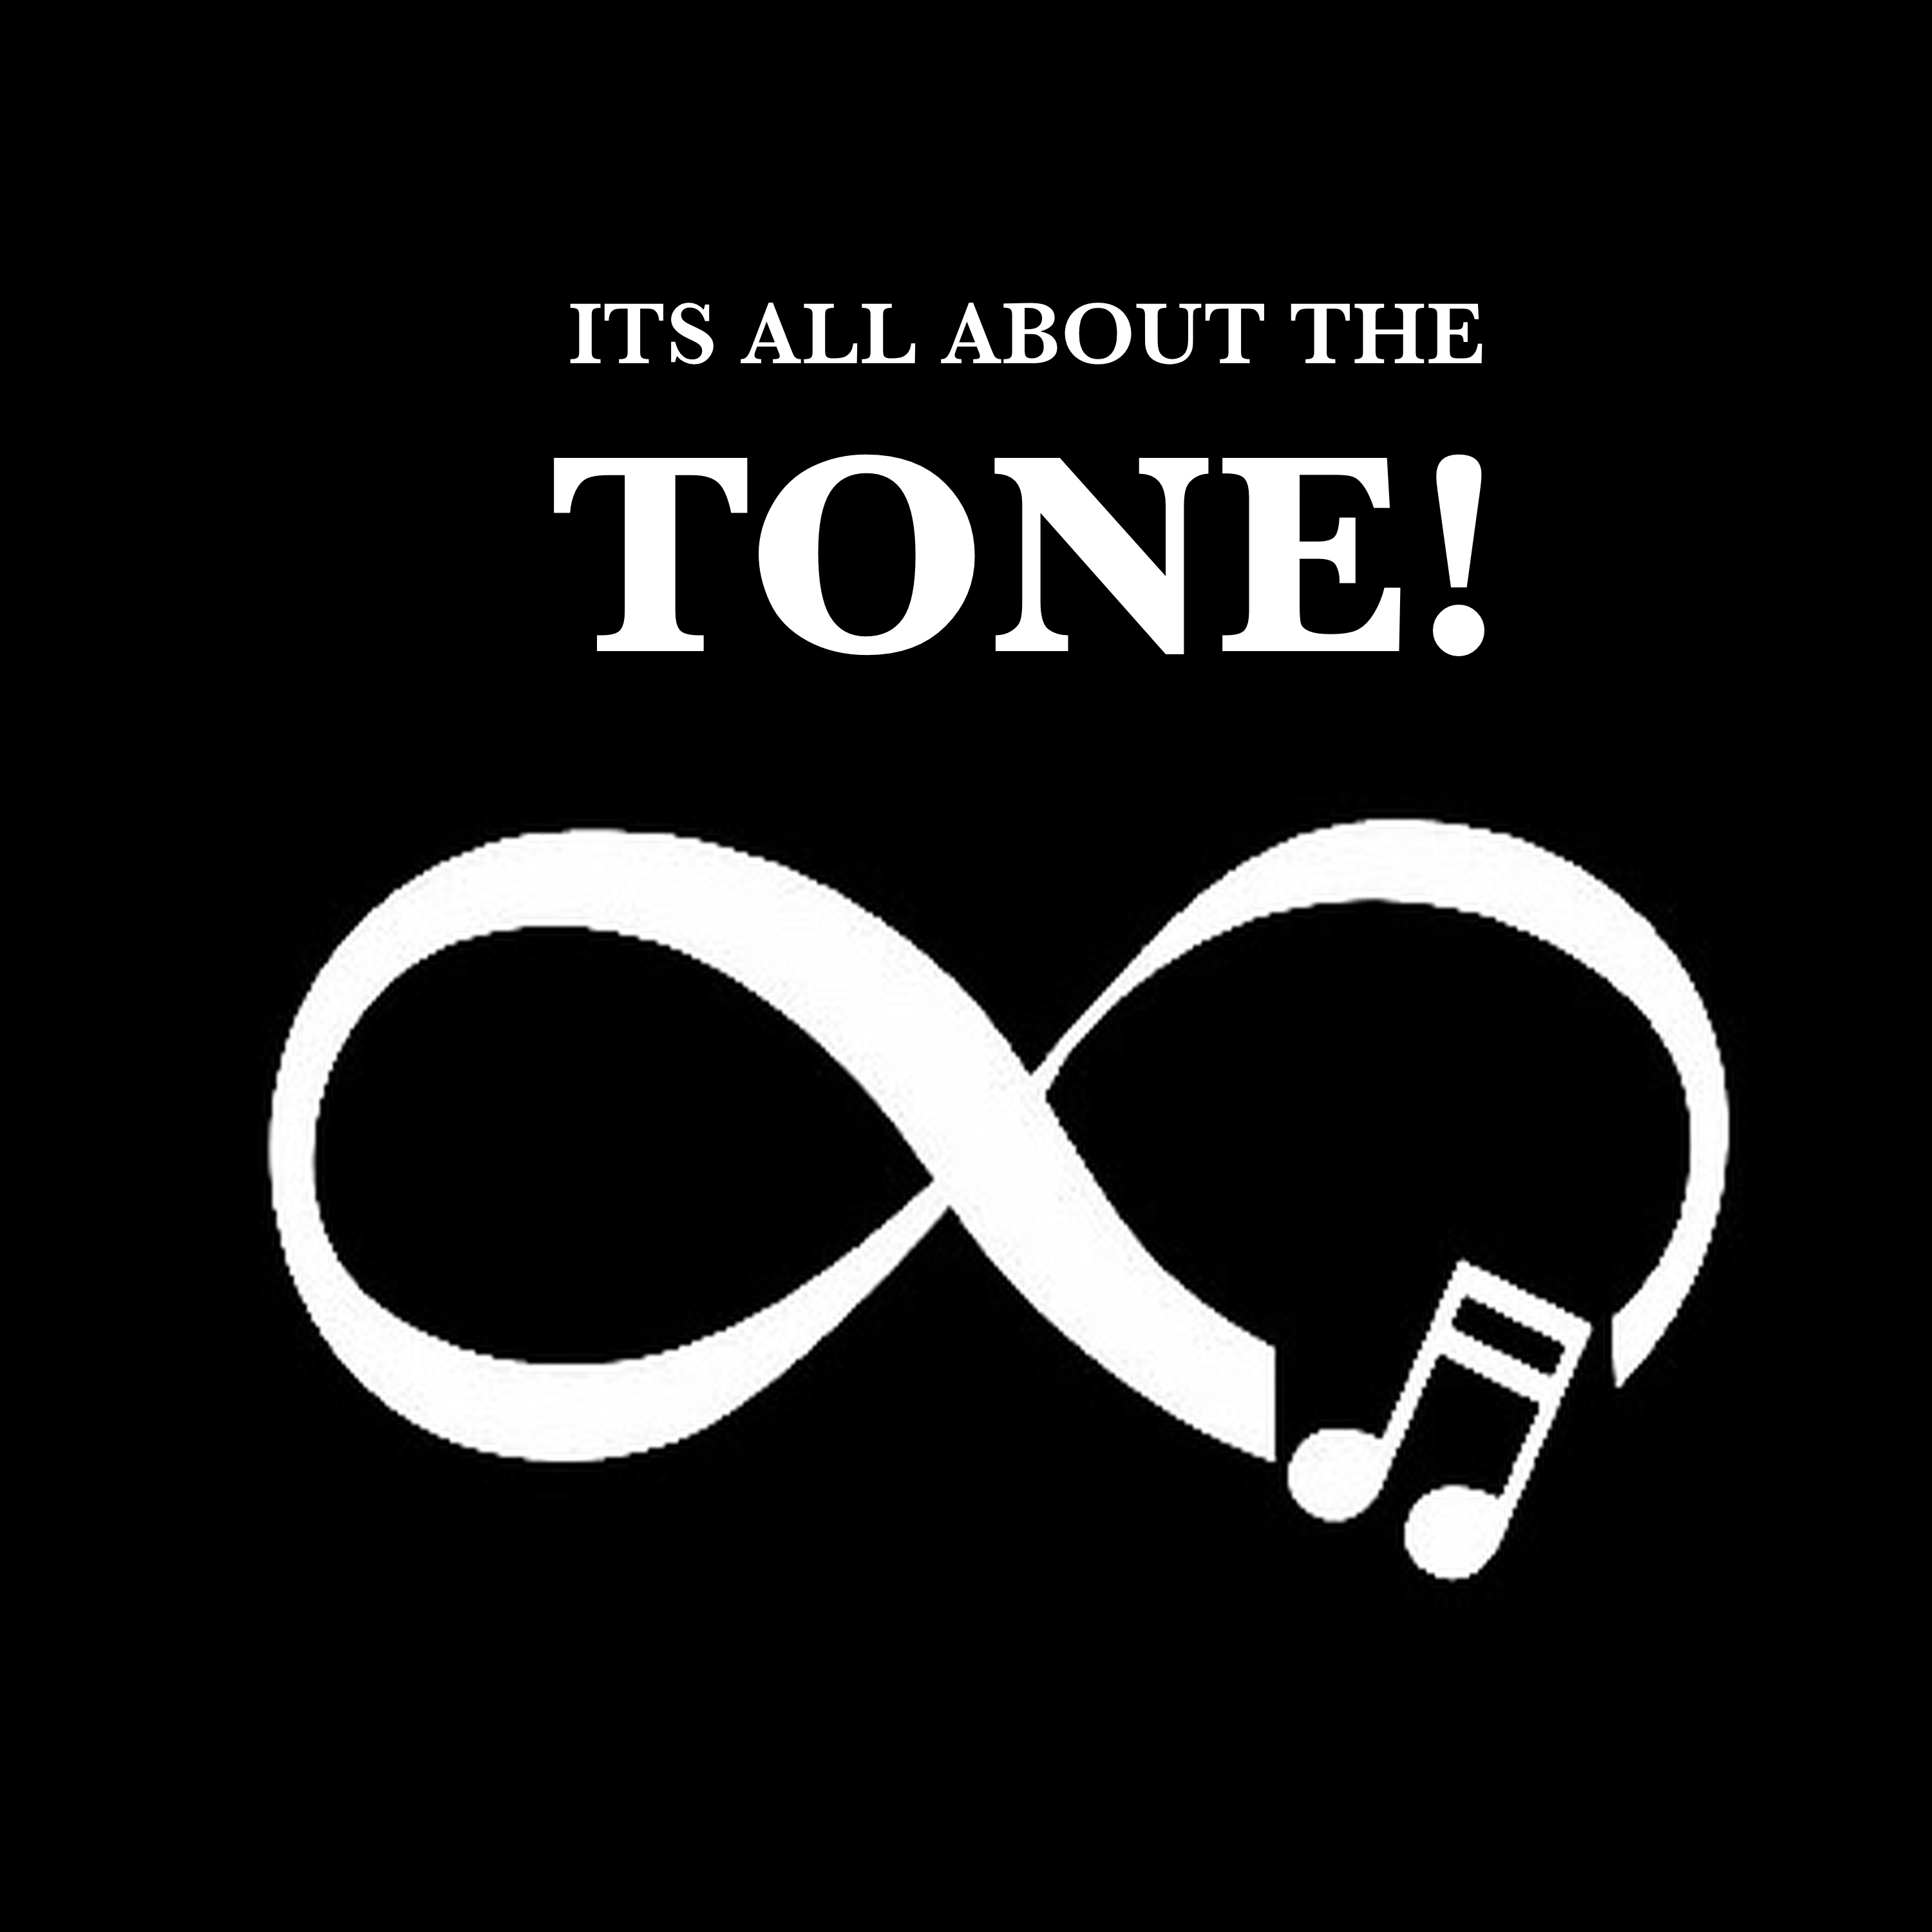 It’s all about the Tone!